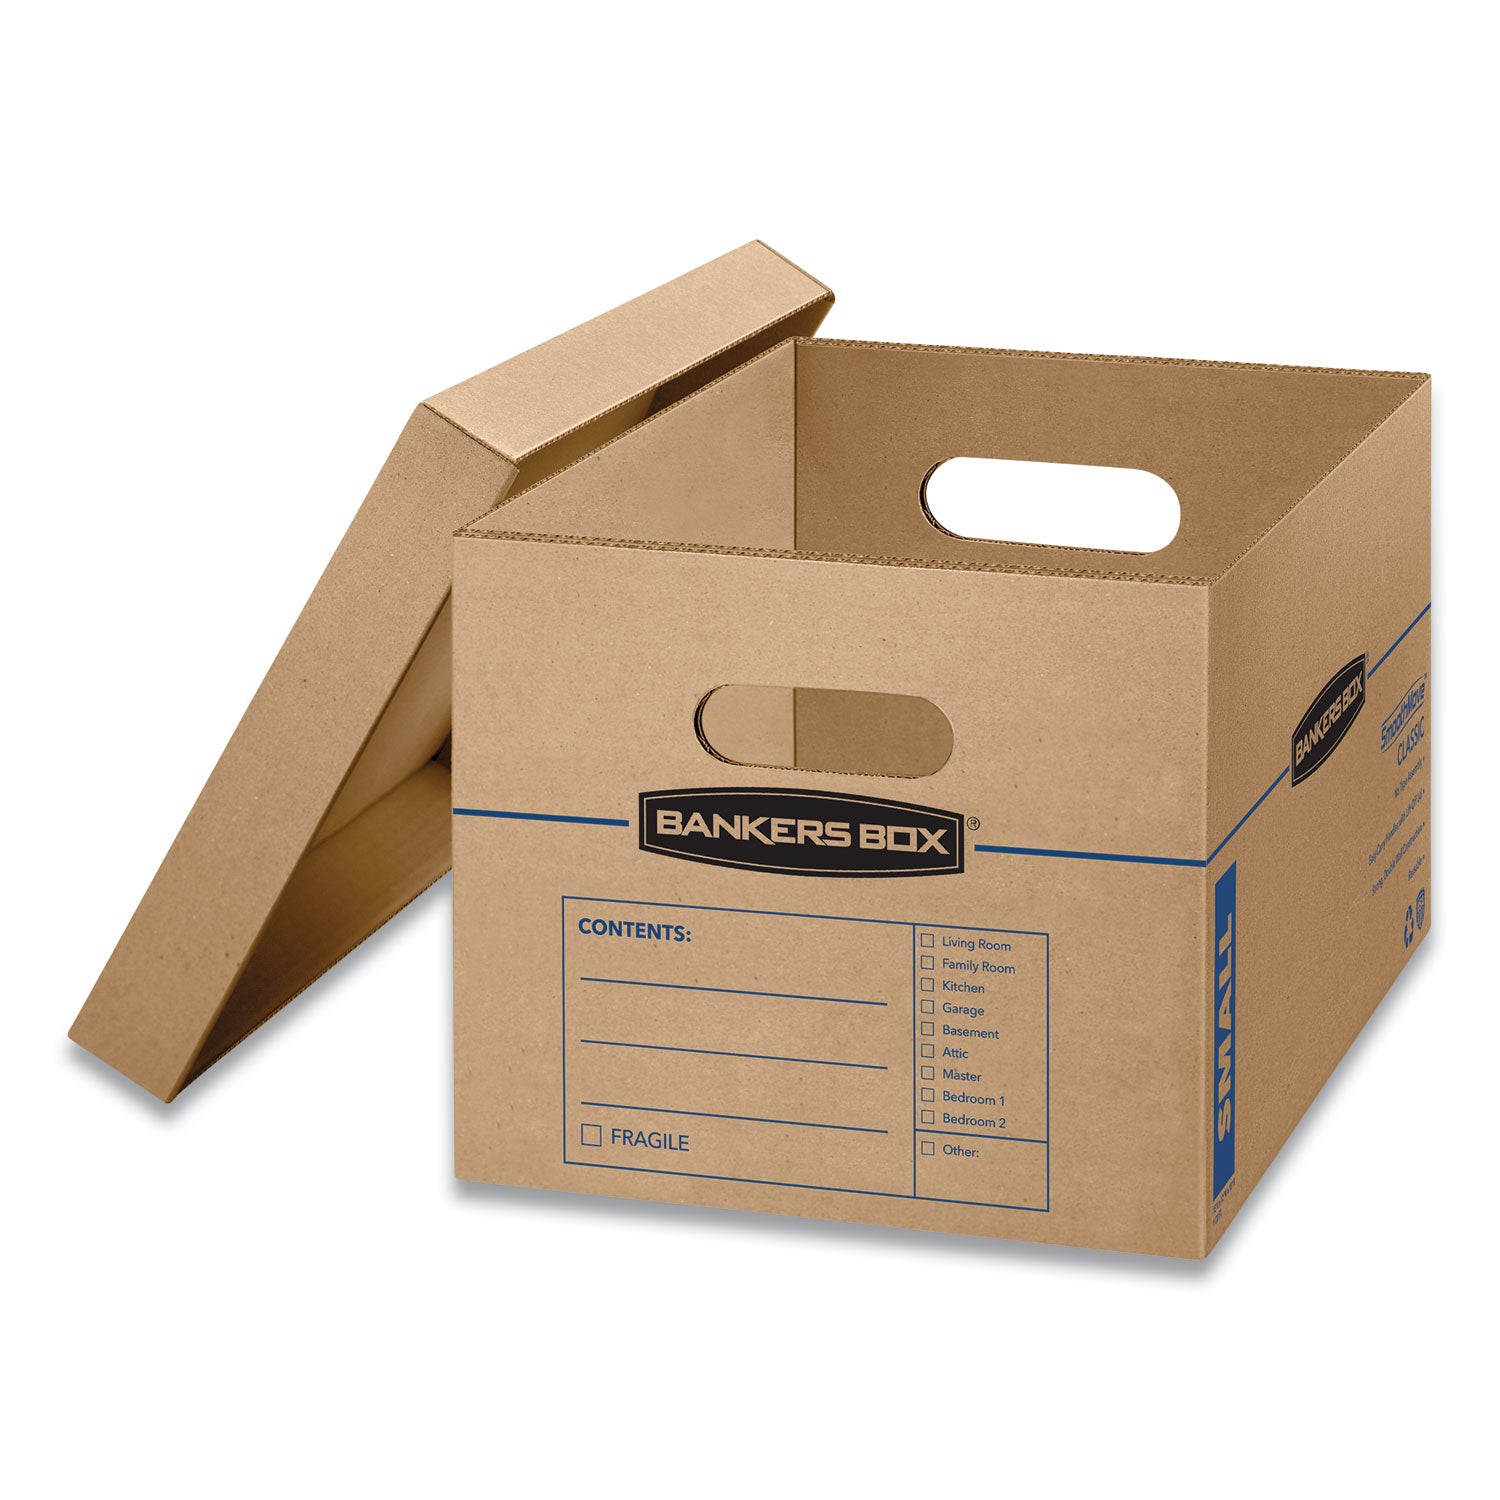 SmoothMove Classic Moving/Storage Boxes, Half Slotted Container (HSC), Small, 12" x 15" x 10", Brown/Blue, 20/Carton - 